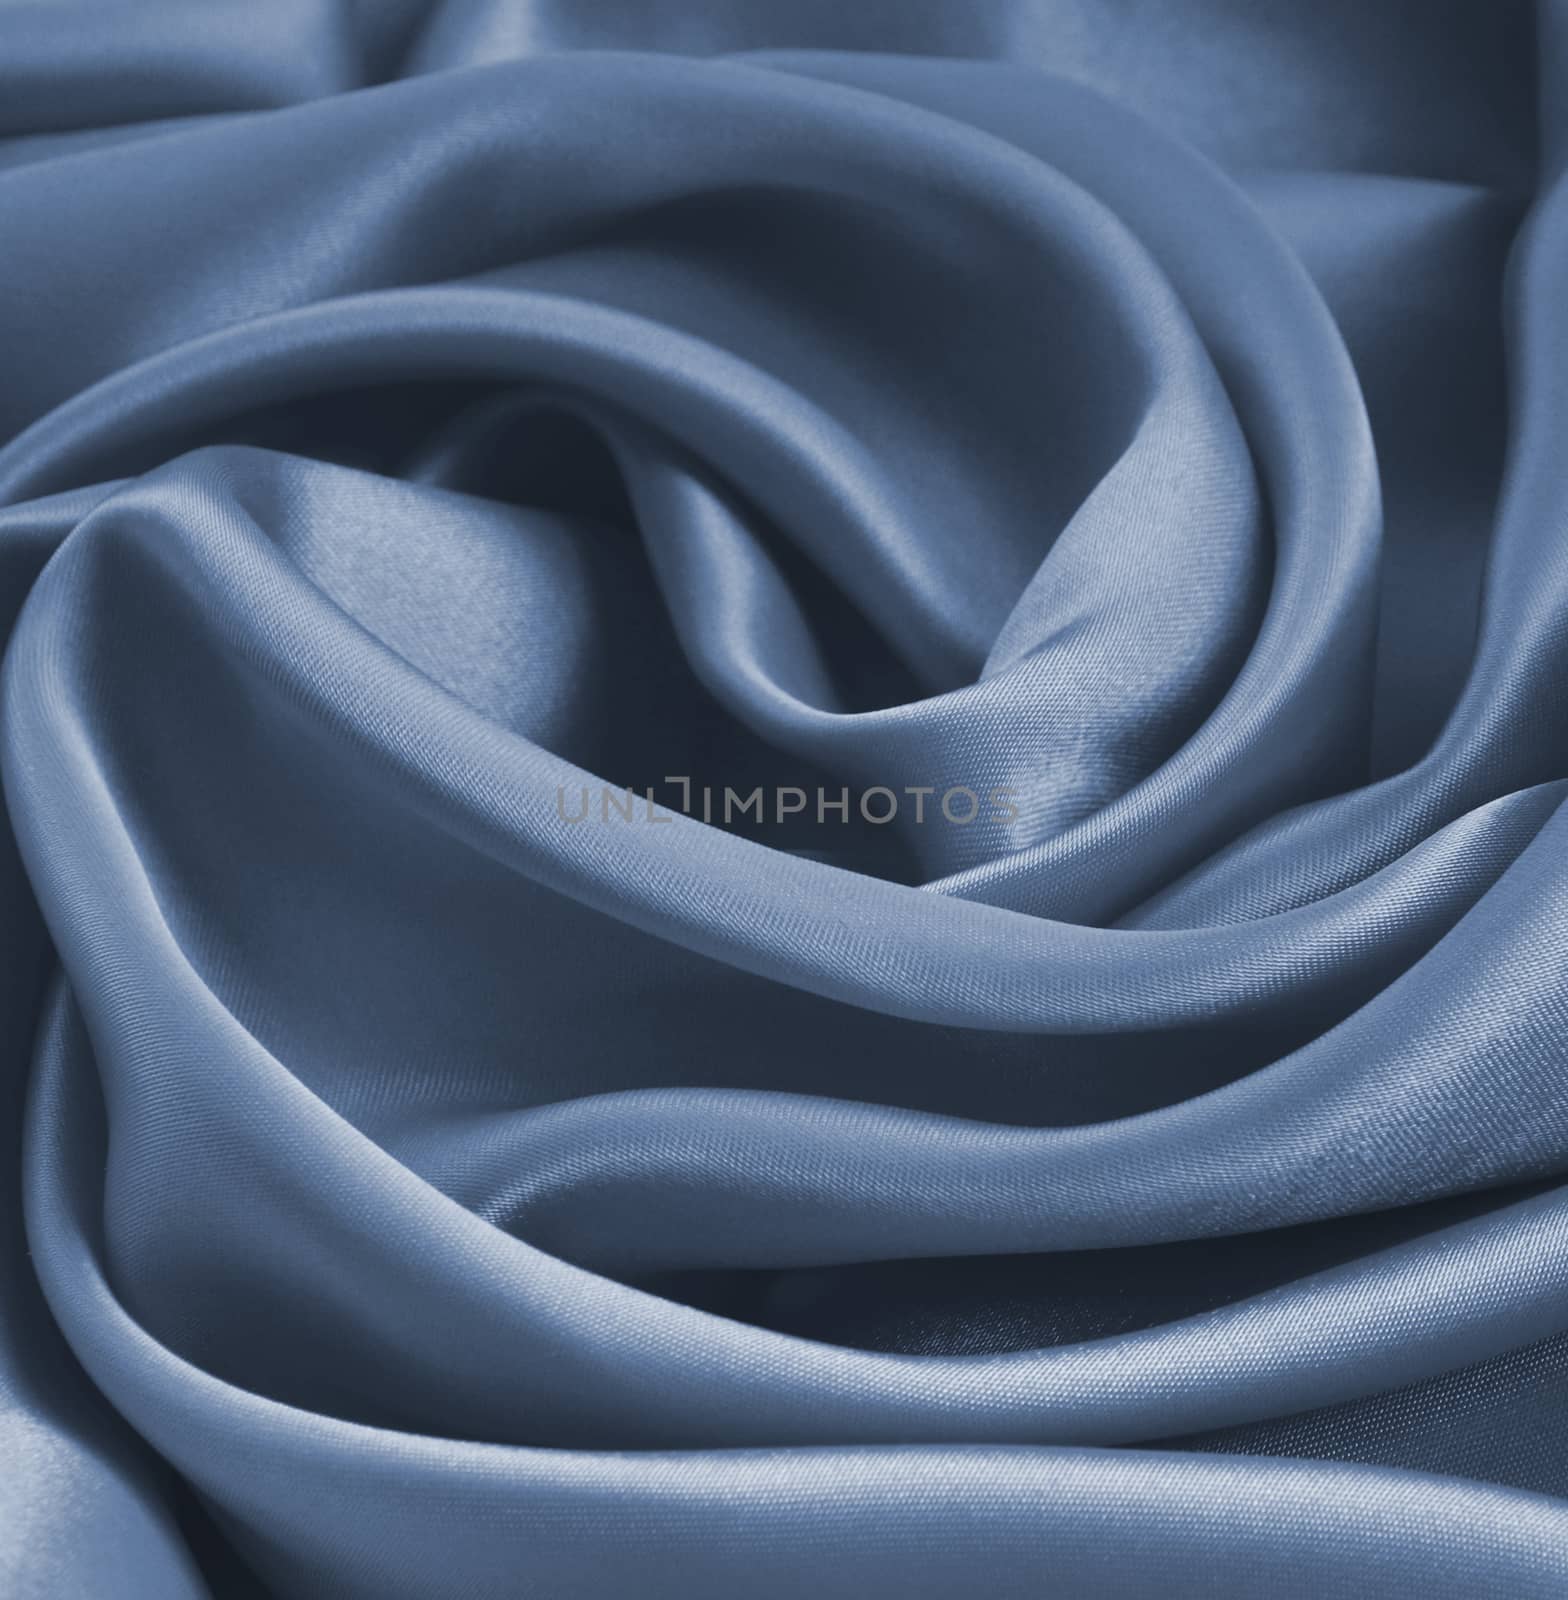 Smooth elegant grey silk or satin can use as background 